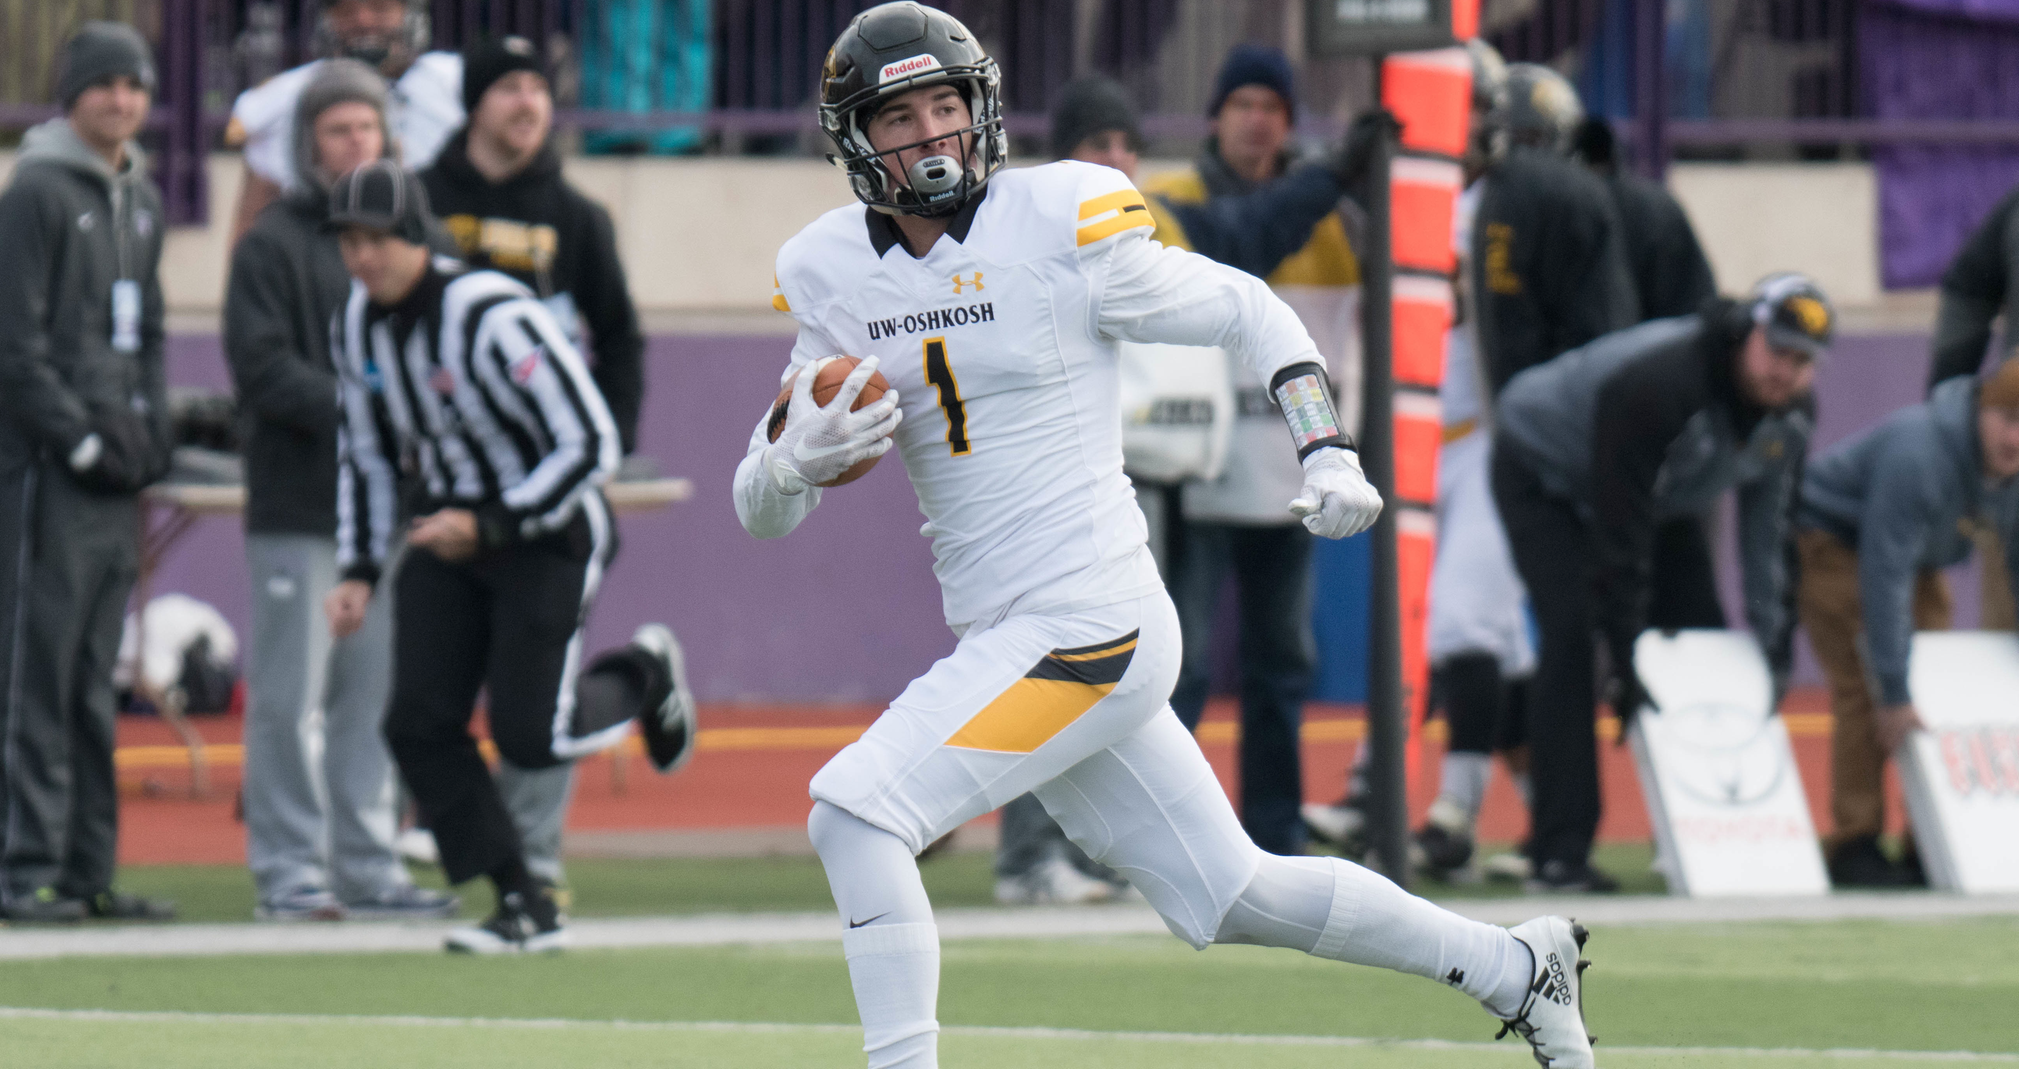 Sam Mentkowski caught seven passes for 184 yards against the Tommies, including touchdowns of 46, 38 and 32 yards.